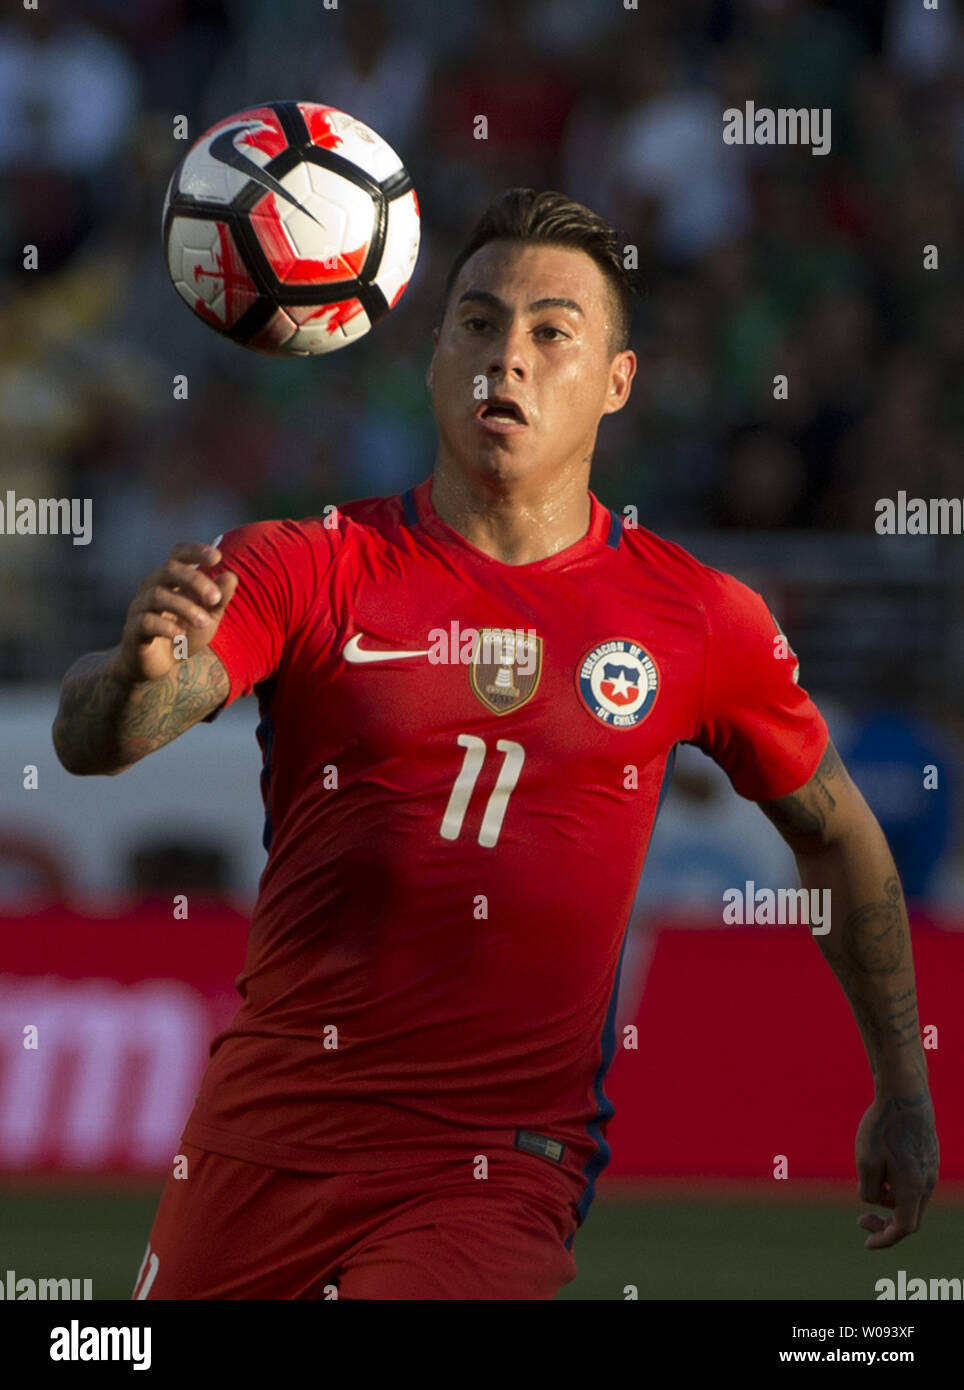 Chile's Eduardo Vargas (11) moves the ball against Mexico in the first half at COPA America Centenario quarter-finals at Levi's Stadium in Santa Clara, California on June 18,  2016. Chile annihilated Mexico 7-0.   Photo by Terry Schmitt/UPI Stock Photo